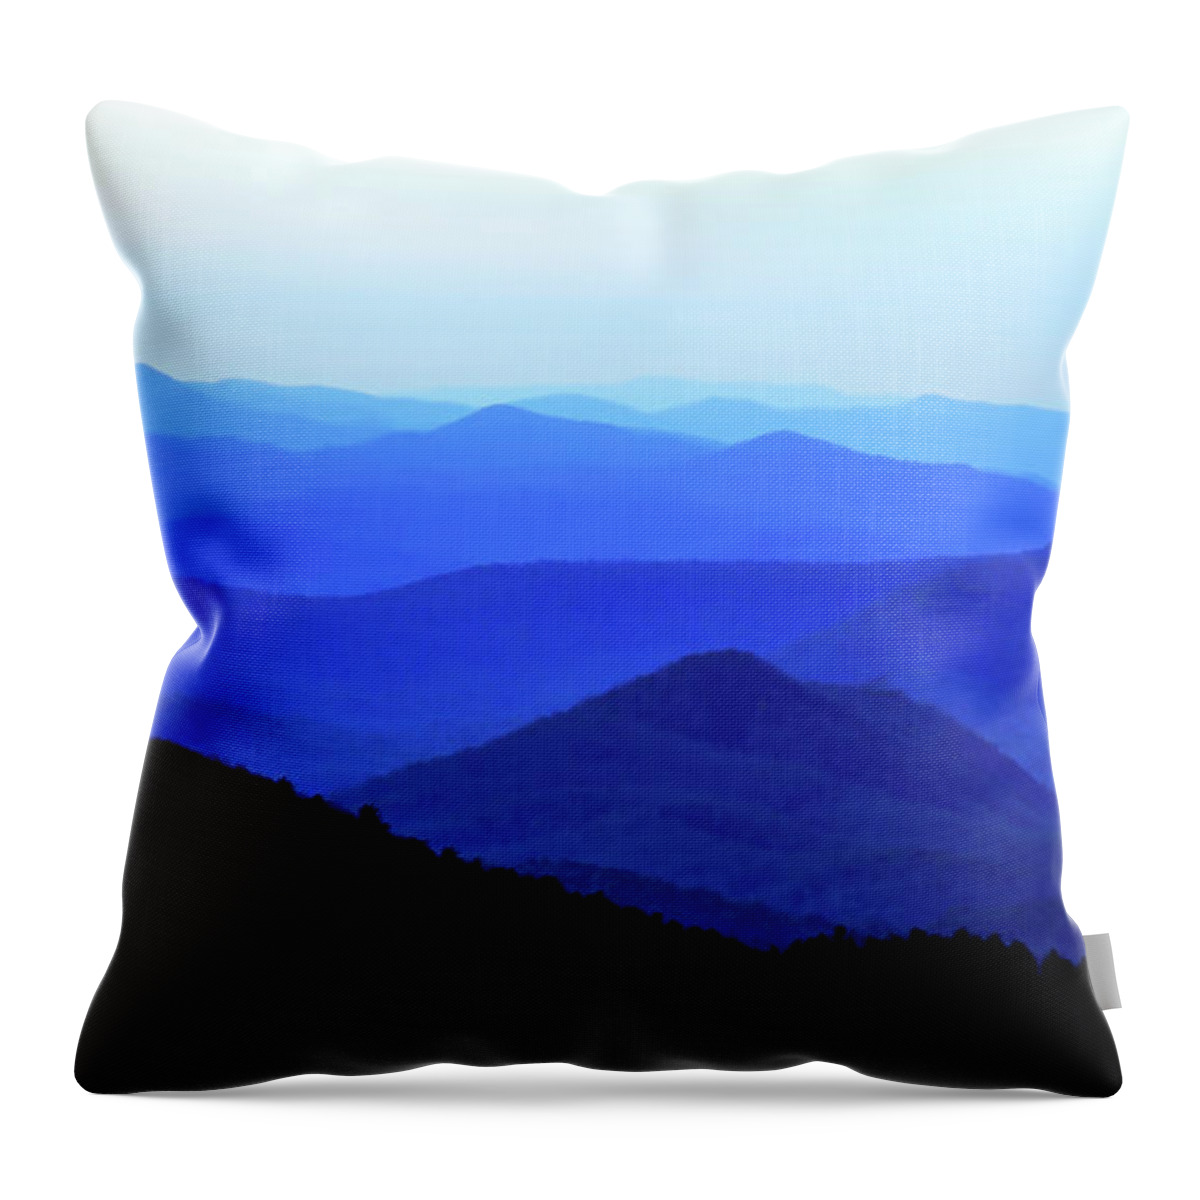 Scenic-blueridge-mountains-parkway Throw Pillow featuring the photograph Blueridge Mountains - Parkway View by Scott Cameron